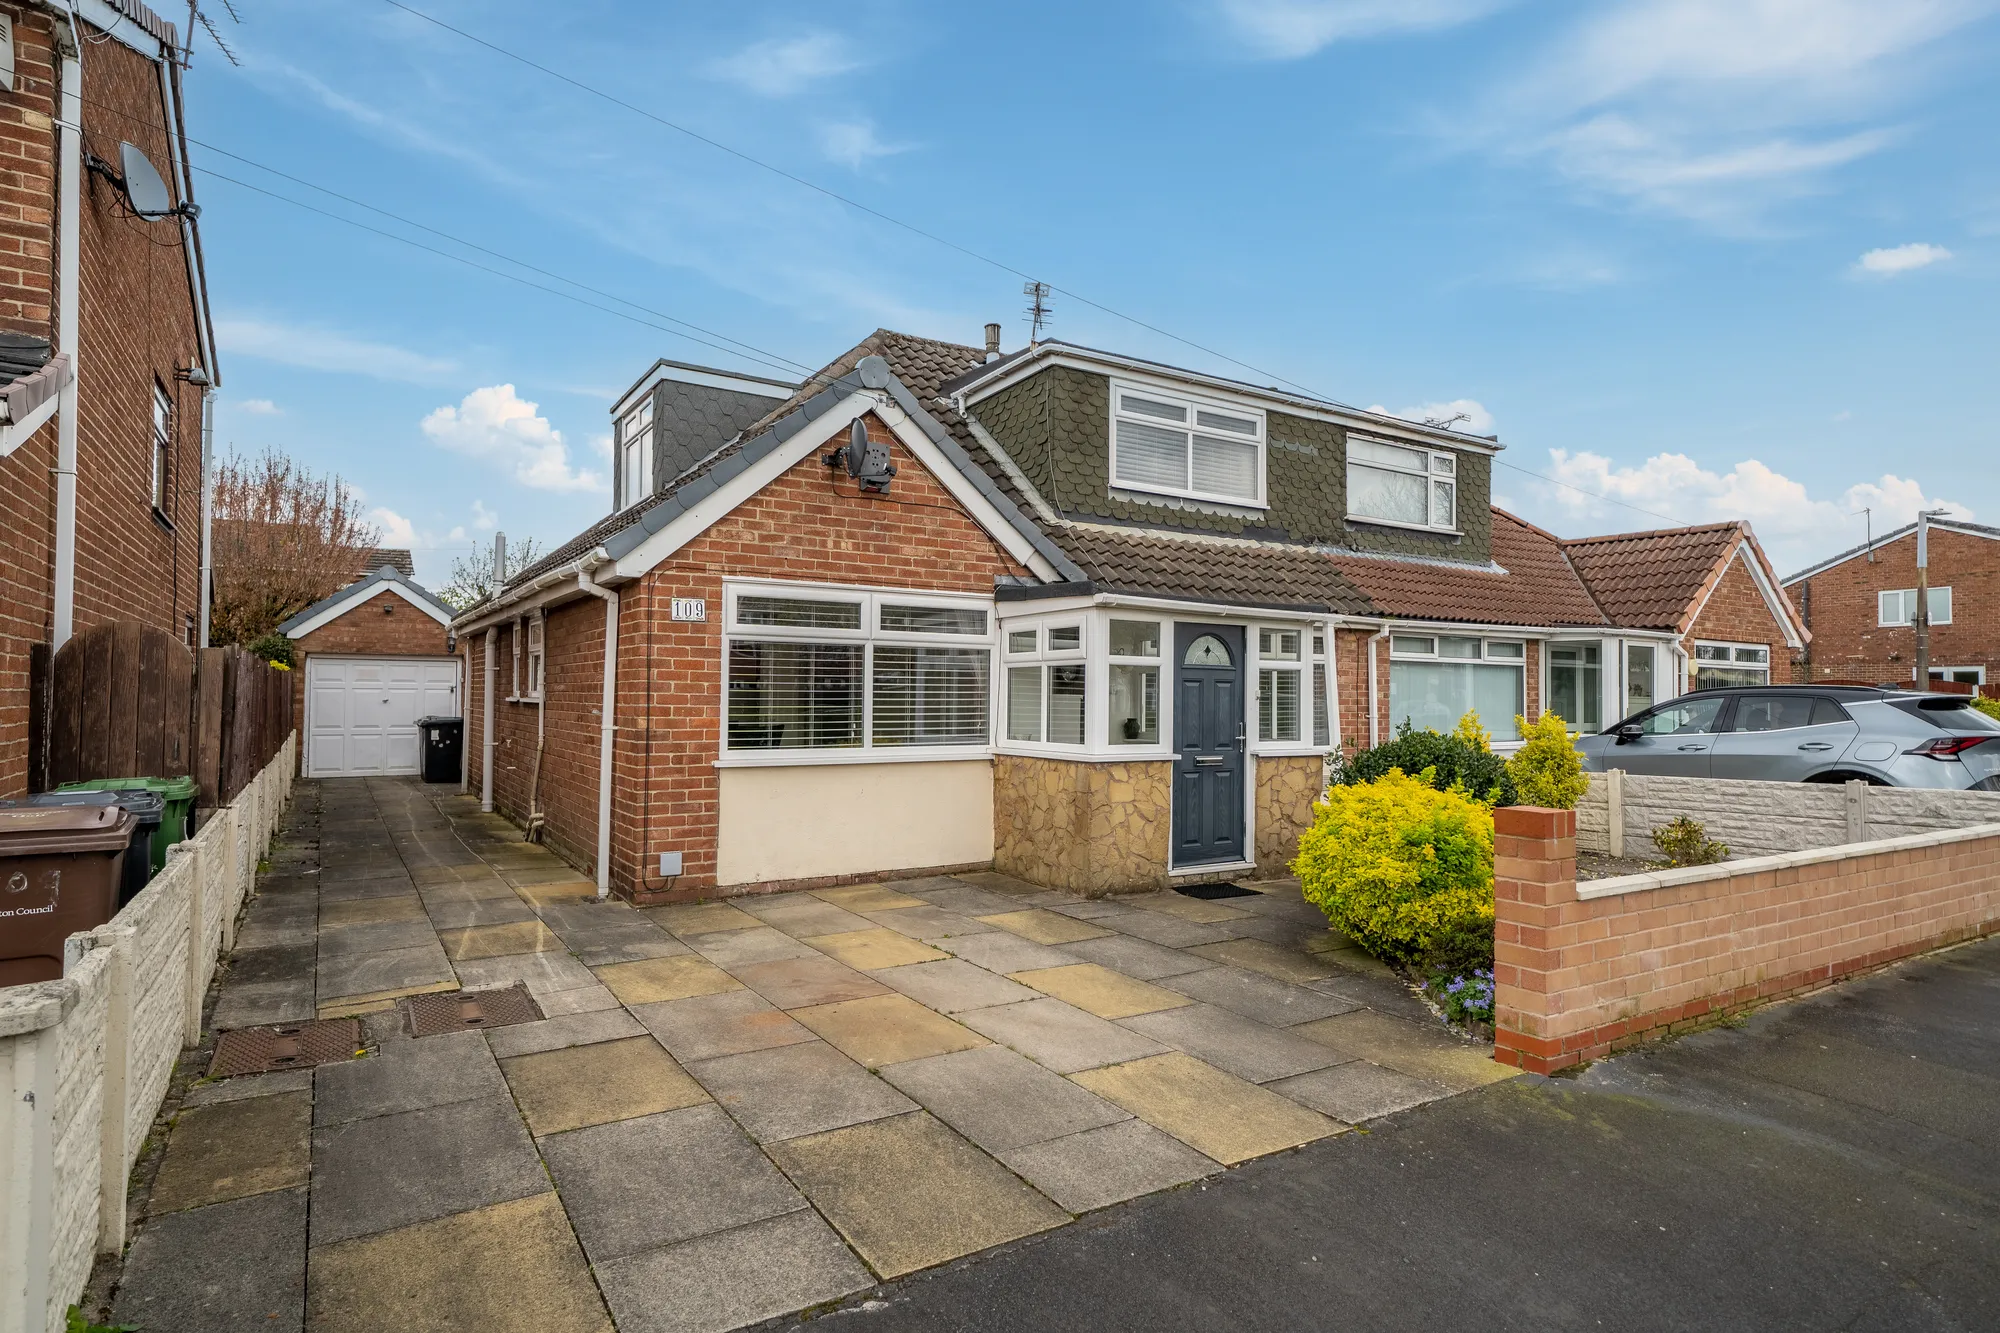 Step into your dream home with this huge 4 Bedroom Bungalow, a true gem waiting for its perfect match. Located in a sought-after area with the convenience of local amenities like Maghull North Train Station and M57 nearby, this Semi-Detached Dormer Bungalow is a delightful find.